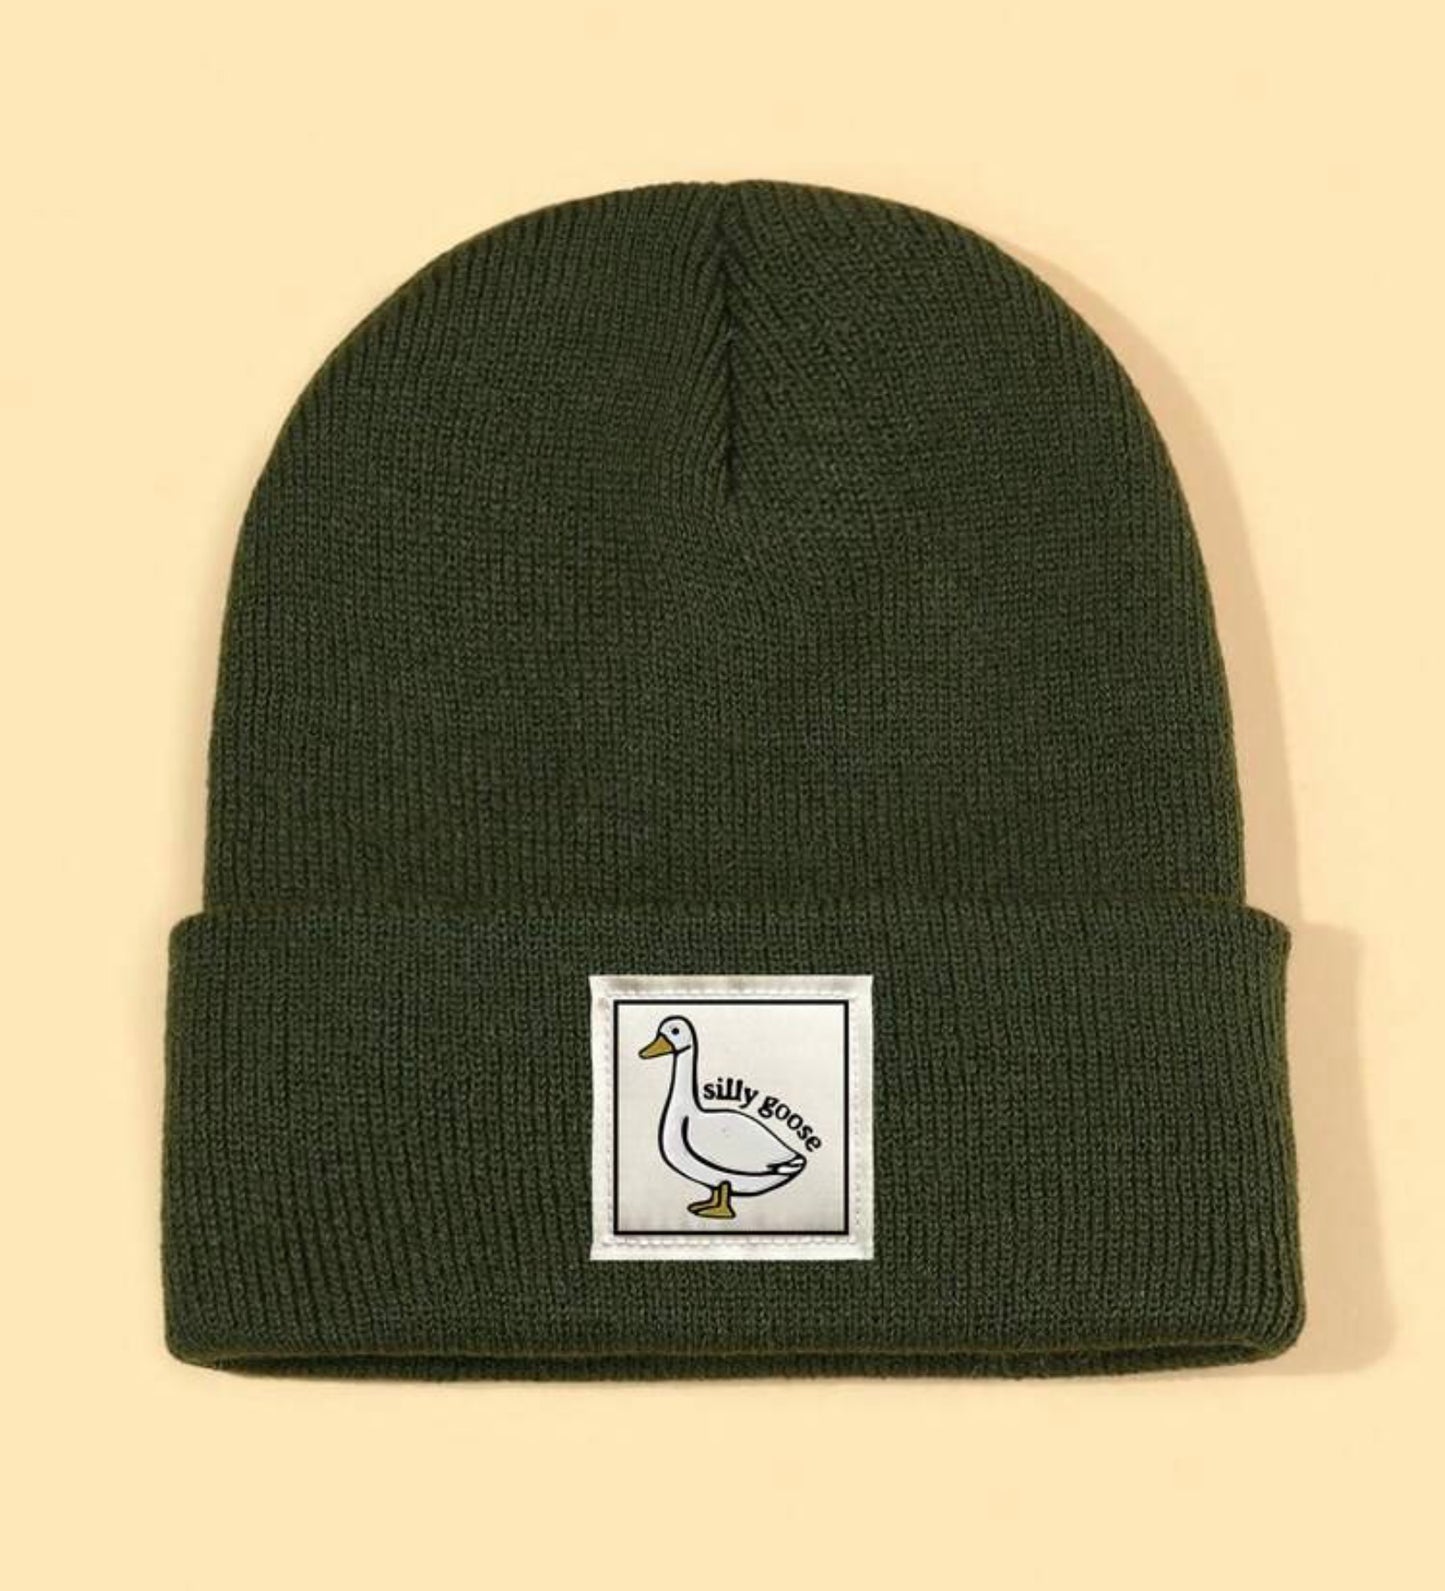 Silly Goose Beanie